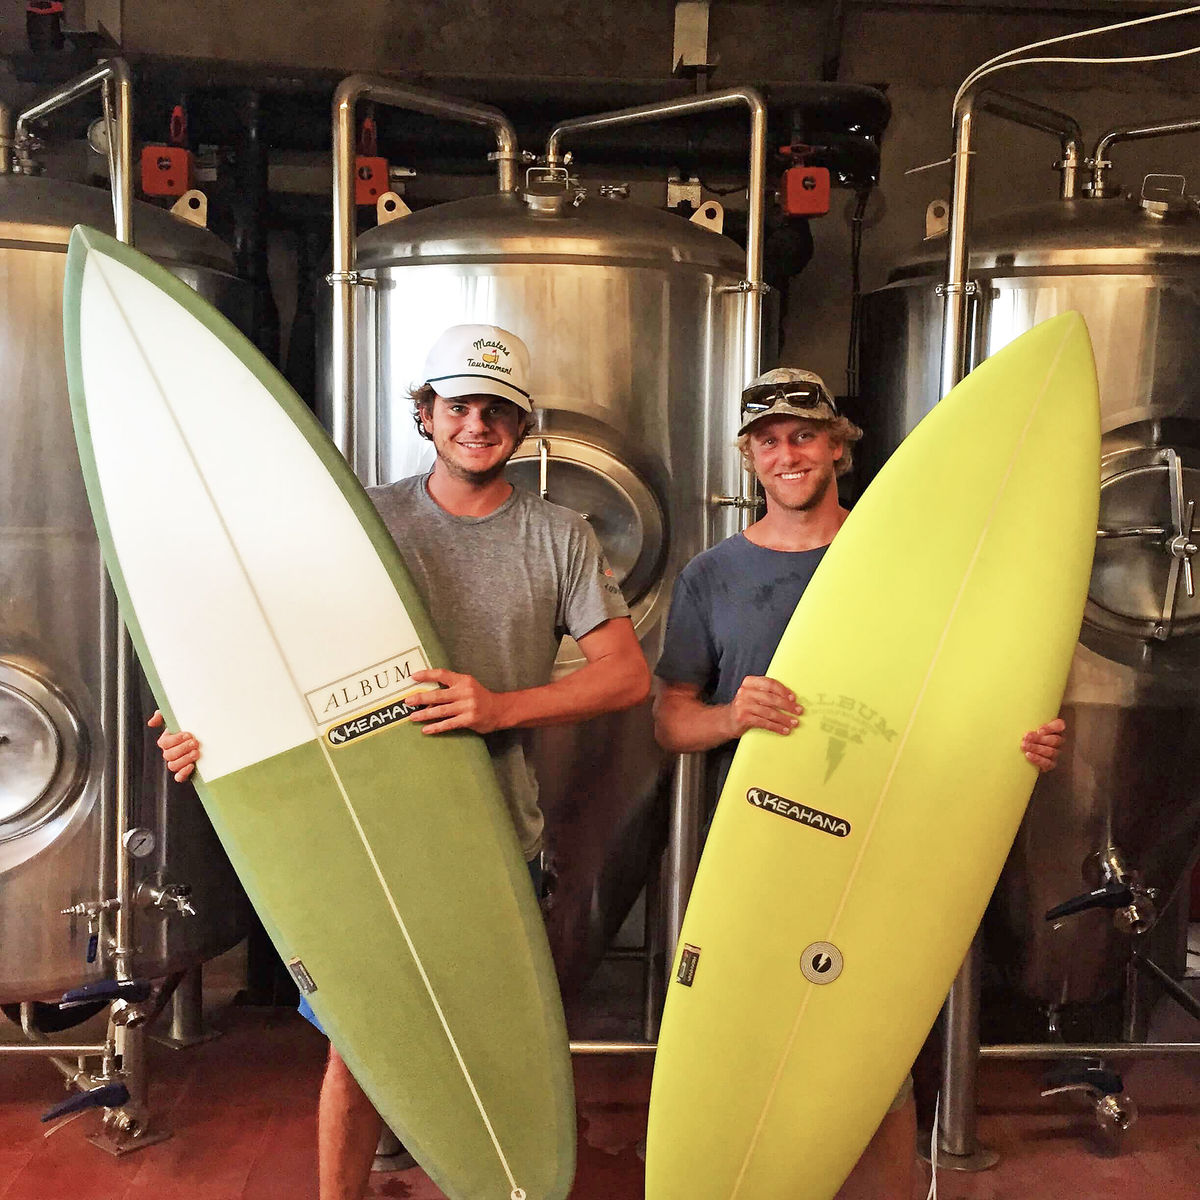 Co-owner Bobby Hottensen, left, and Matt Greenberg, founder, relished the relatively undeveloped beauty of Nicaragua and the chilled vibes of San Juan del Sur, the country’s premier beach town, before starting Nicaragua Craft Beer Co.